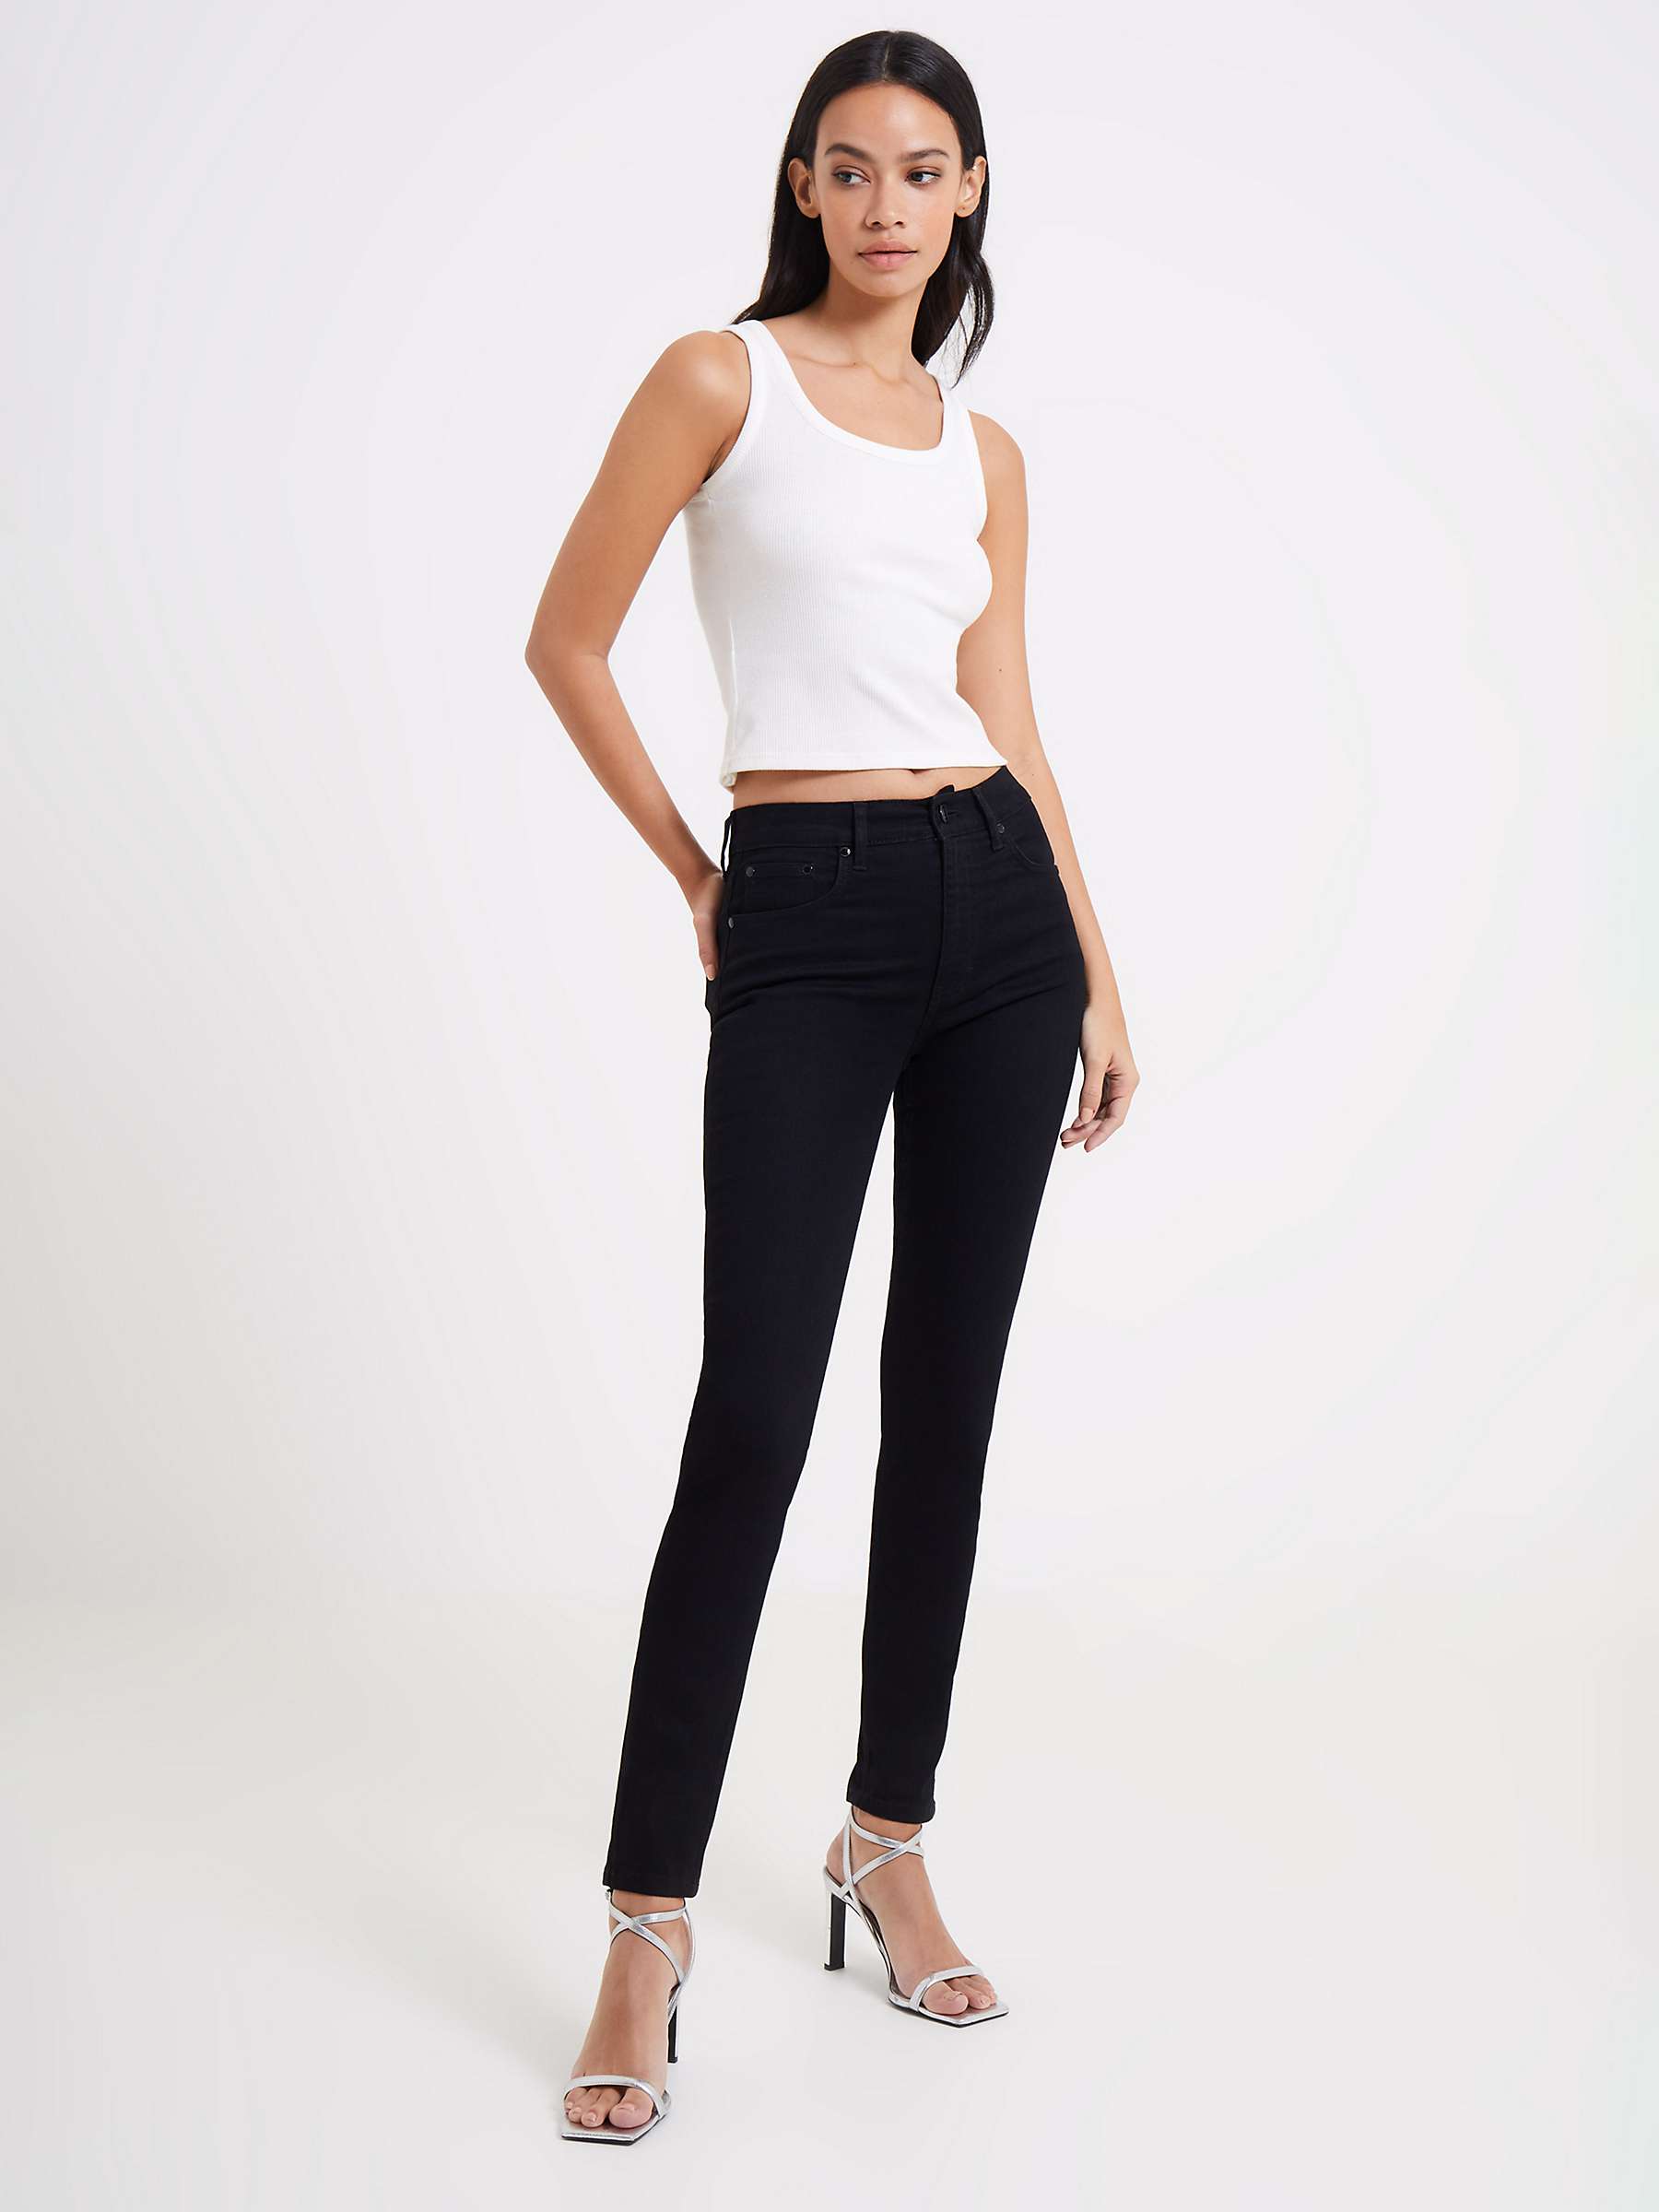 Buy French Connection Rebound Response Skinny Jeans Online at johnlewis.com